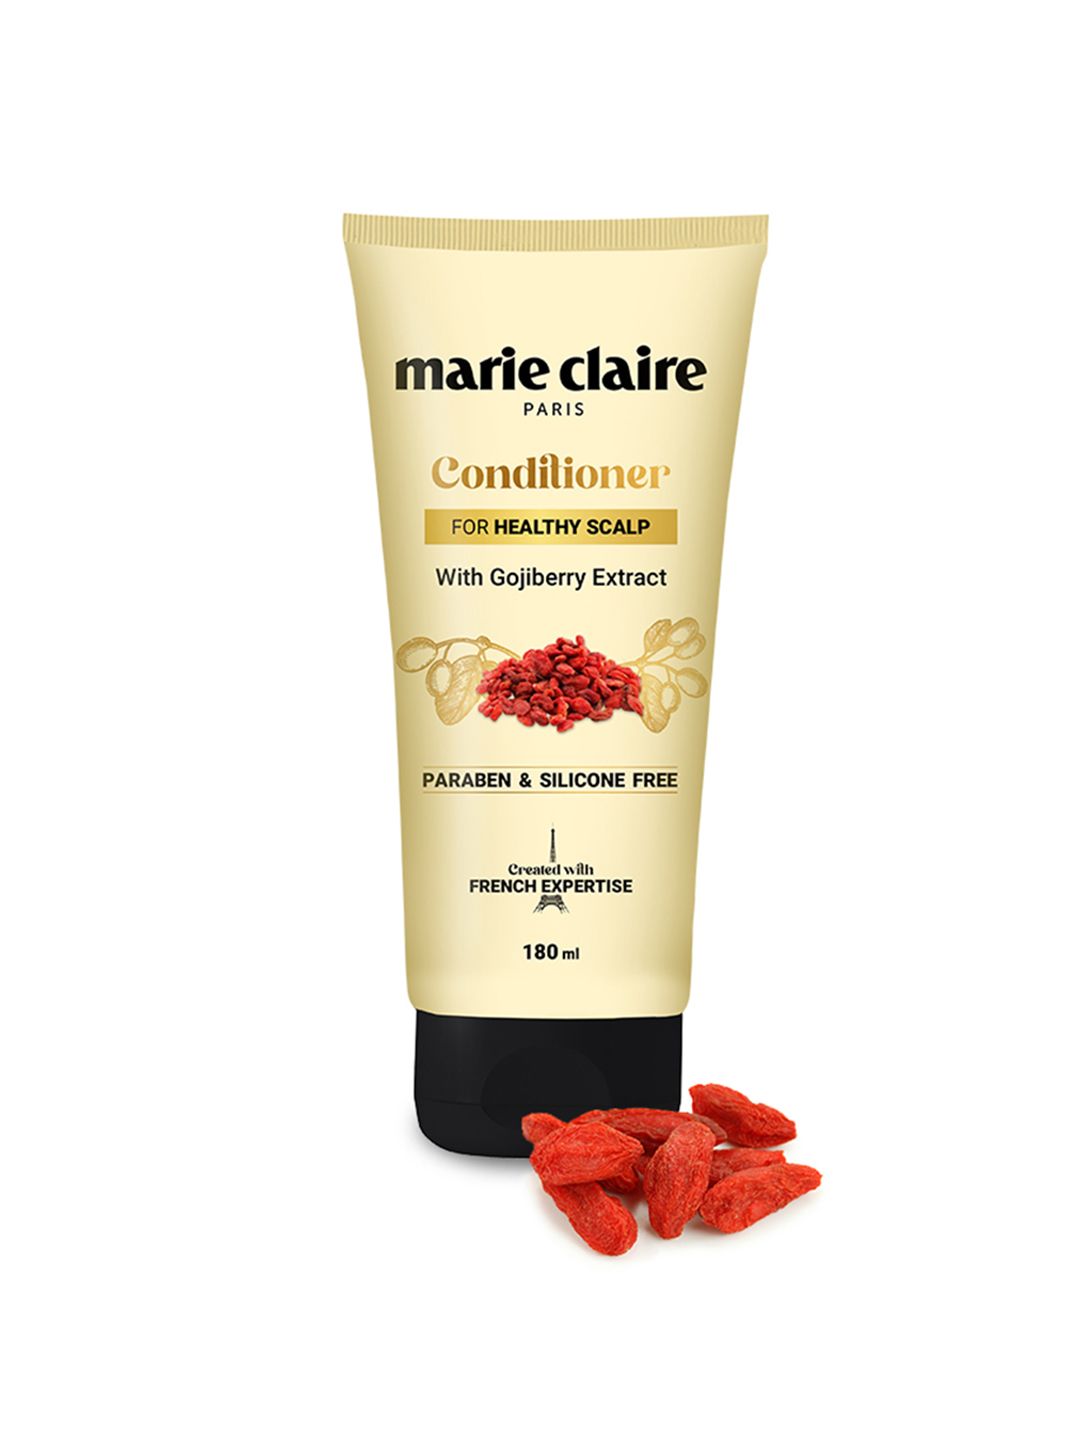 Marie Claire Conditioner for Healthy Scalp 180 ml Price in India